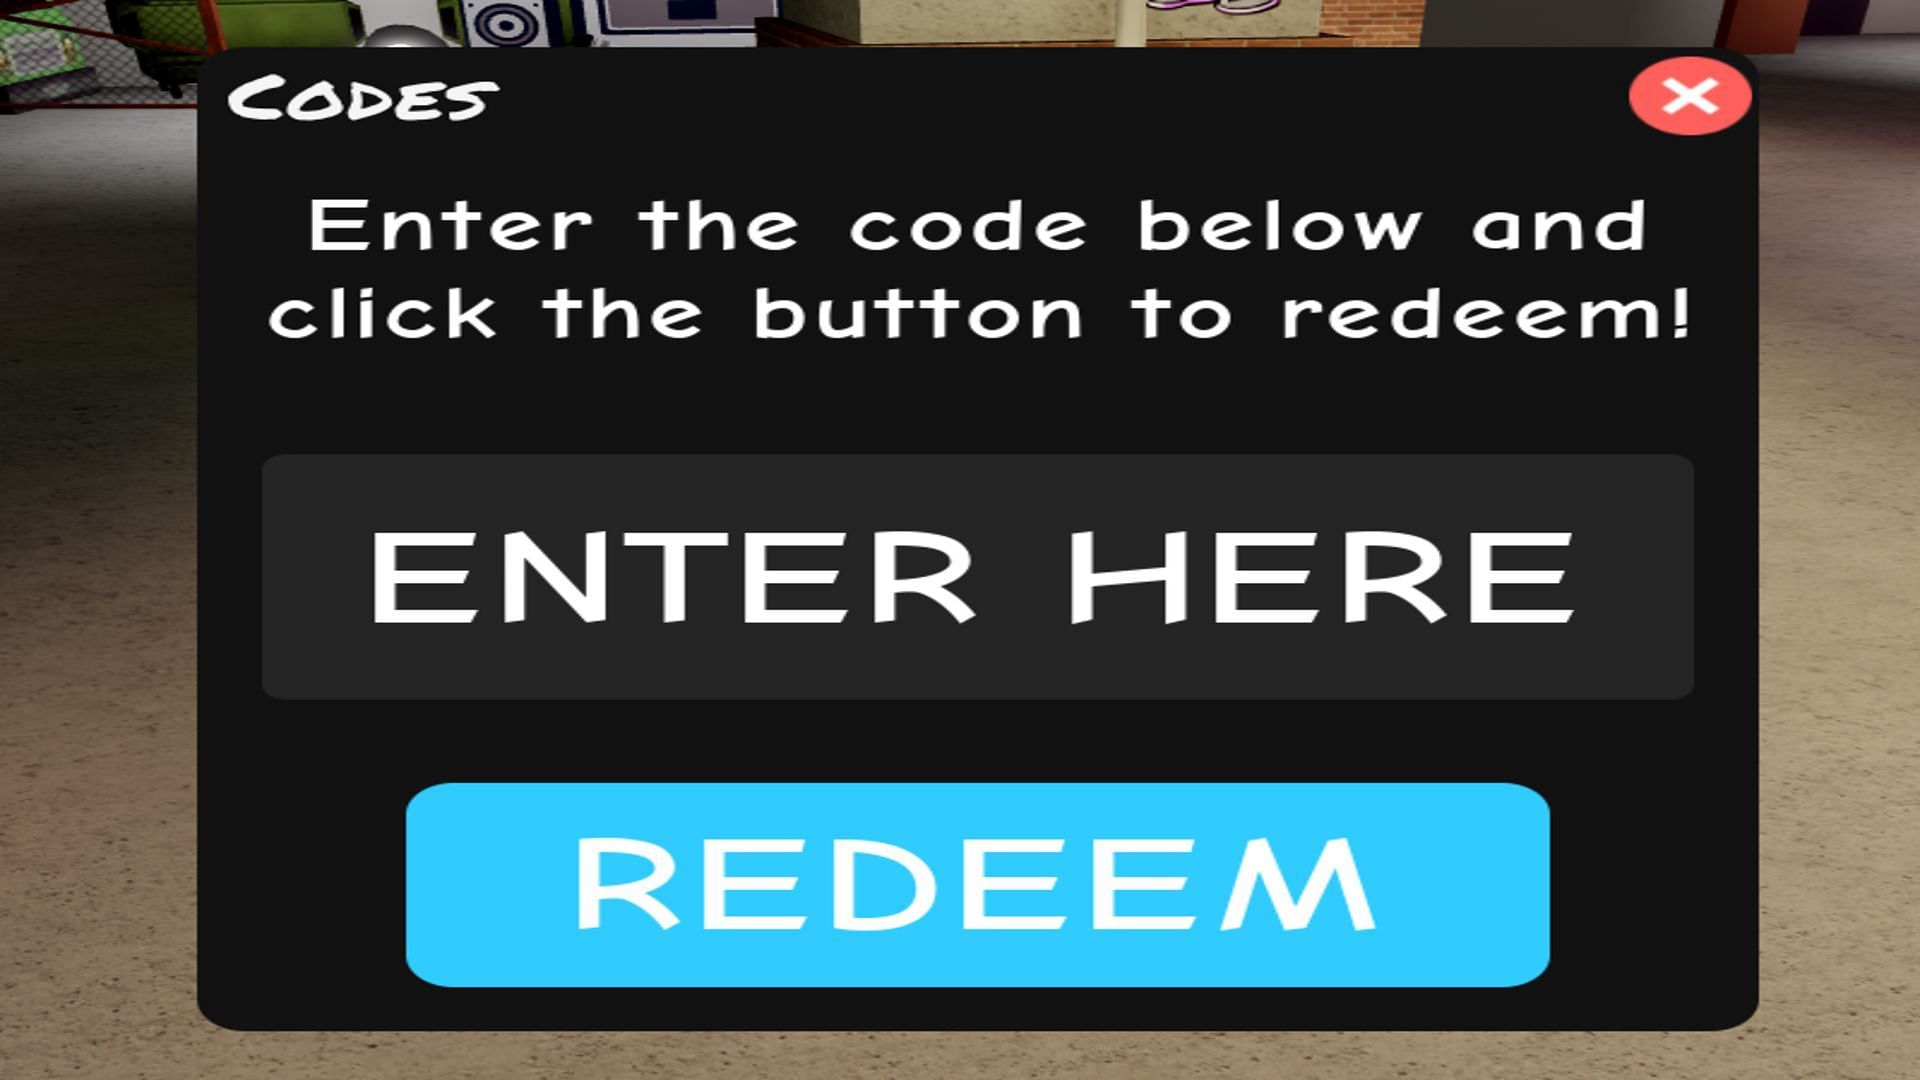 Only valid codes work here (Image via Roblox)